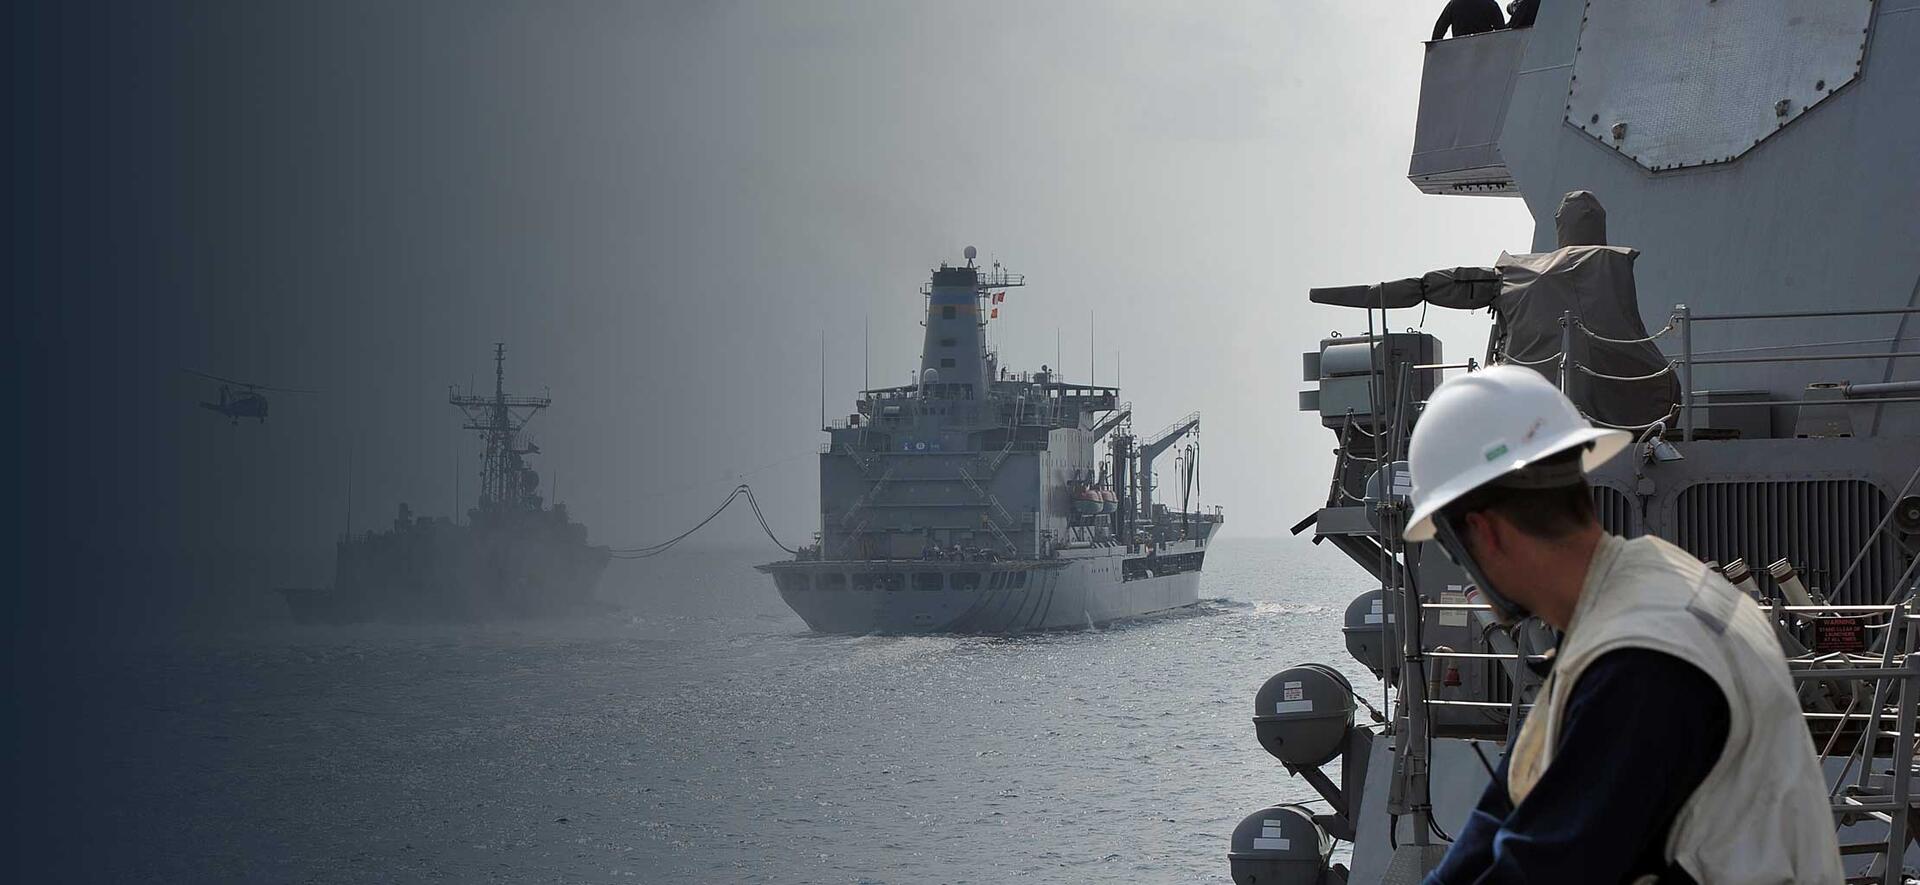 Ensign Ian Schnur, assigned to the Arleigh Burke-class guided-missile destroyer USS McCampbell (DDG 85), watches as the Military Sealift Command fleet replenishment oiler USNS Pecos (T-AO-197) conducts a replenishment at sea with the guided-missile frigate USS Vandegrift (FFG 48). (U.S. Navy photo by Mass Communication Specialist Seaman Declan Barnes) Pacific patrol 